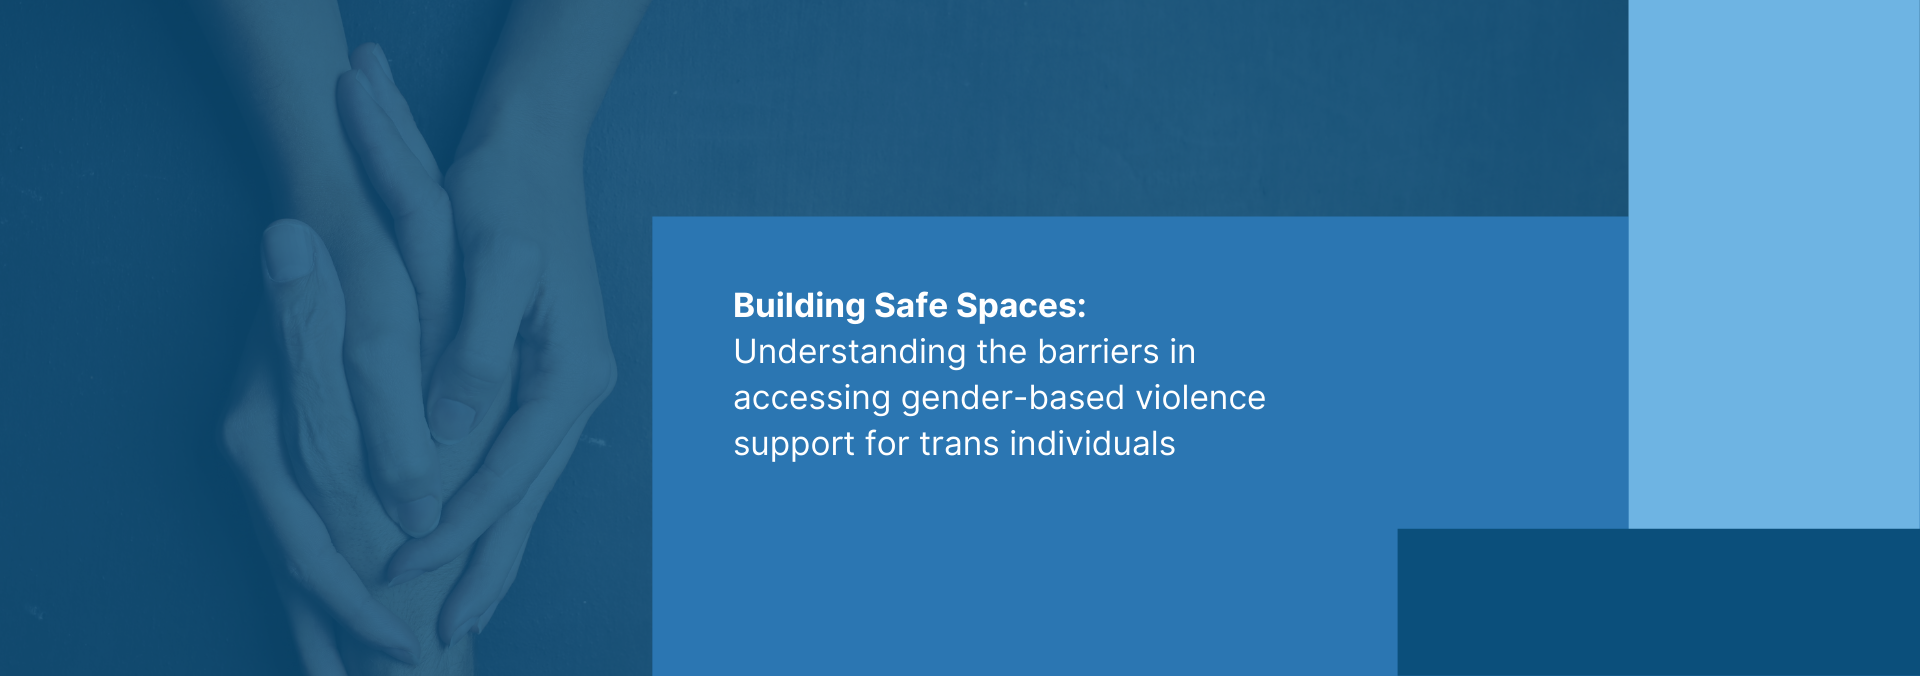 Building Safe Spaces: Understanding the barriers in accessing gender-based violence support for trans individuals